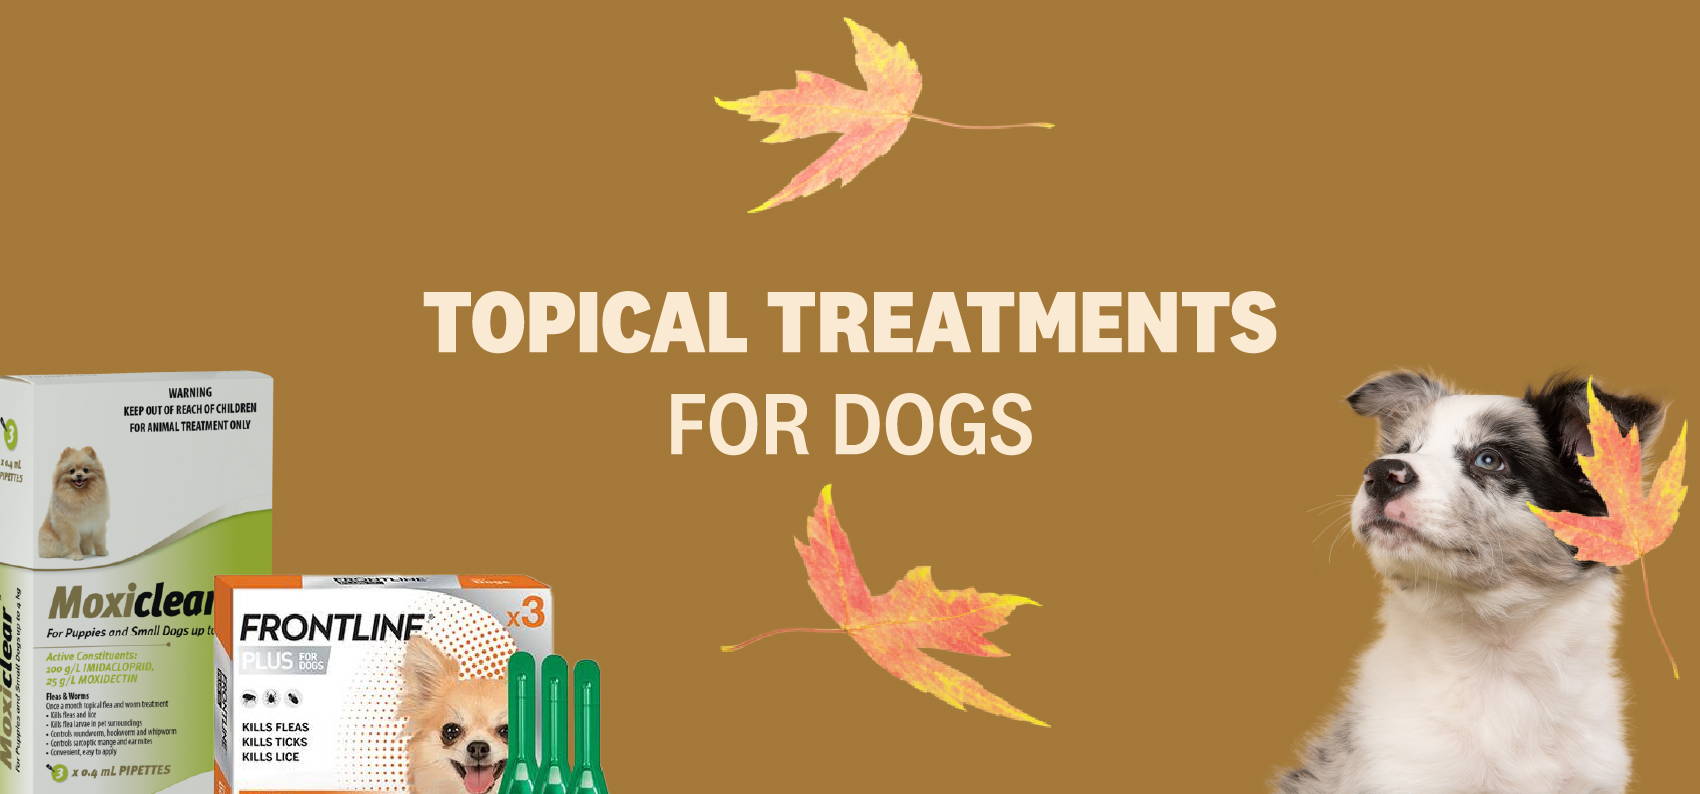 TOPICAL TREATMENTS FOR DOGS